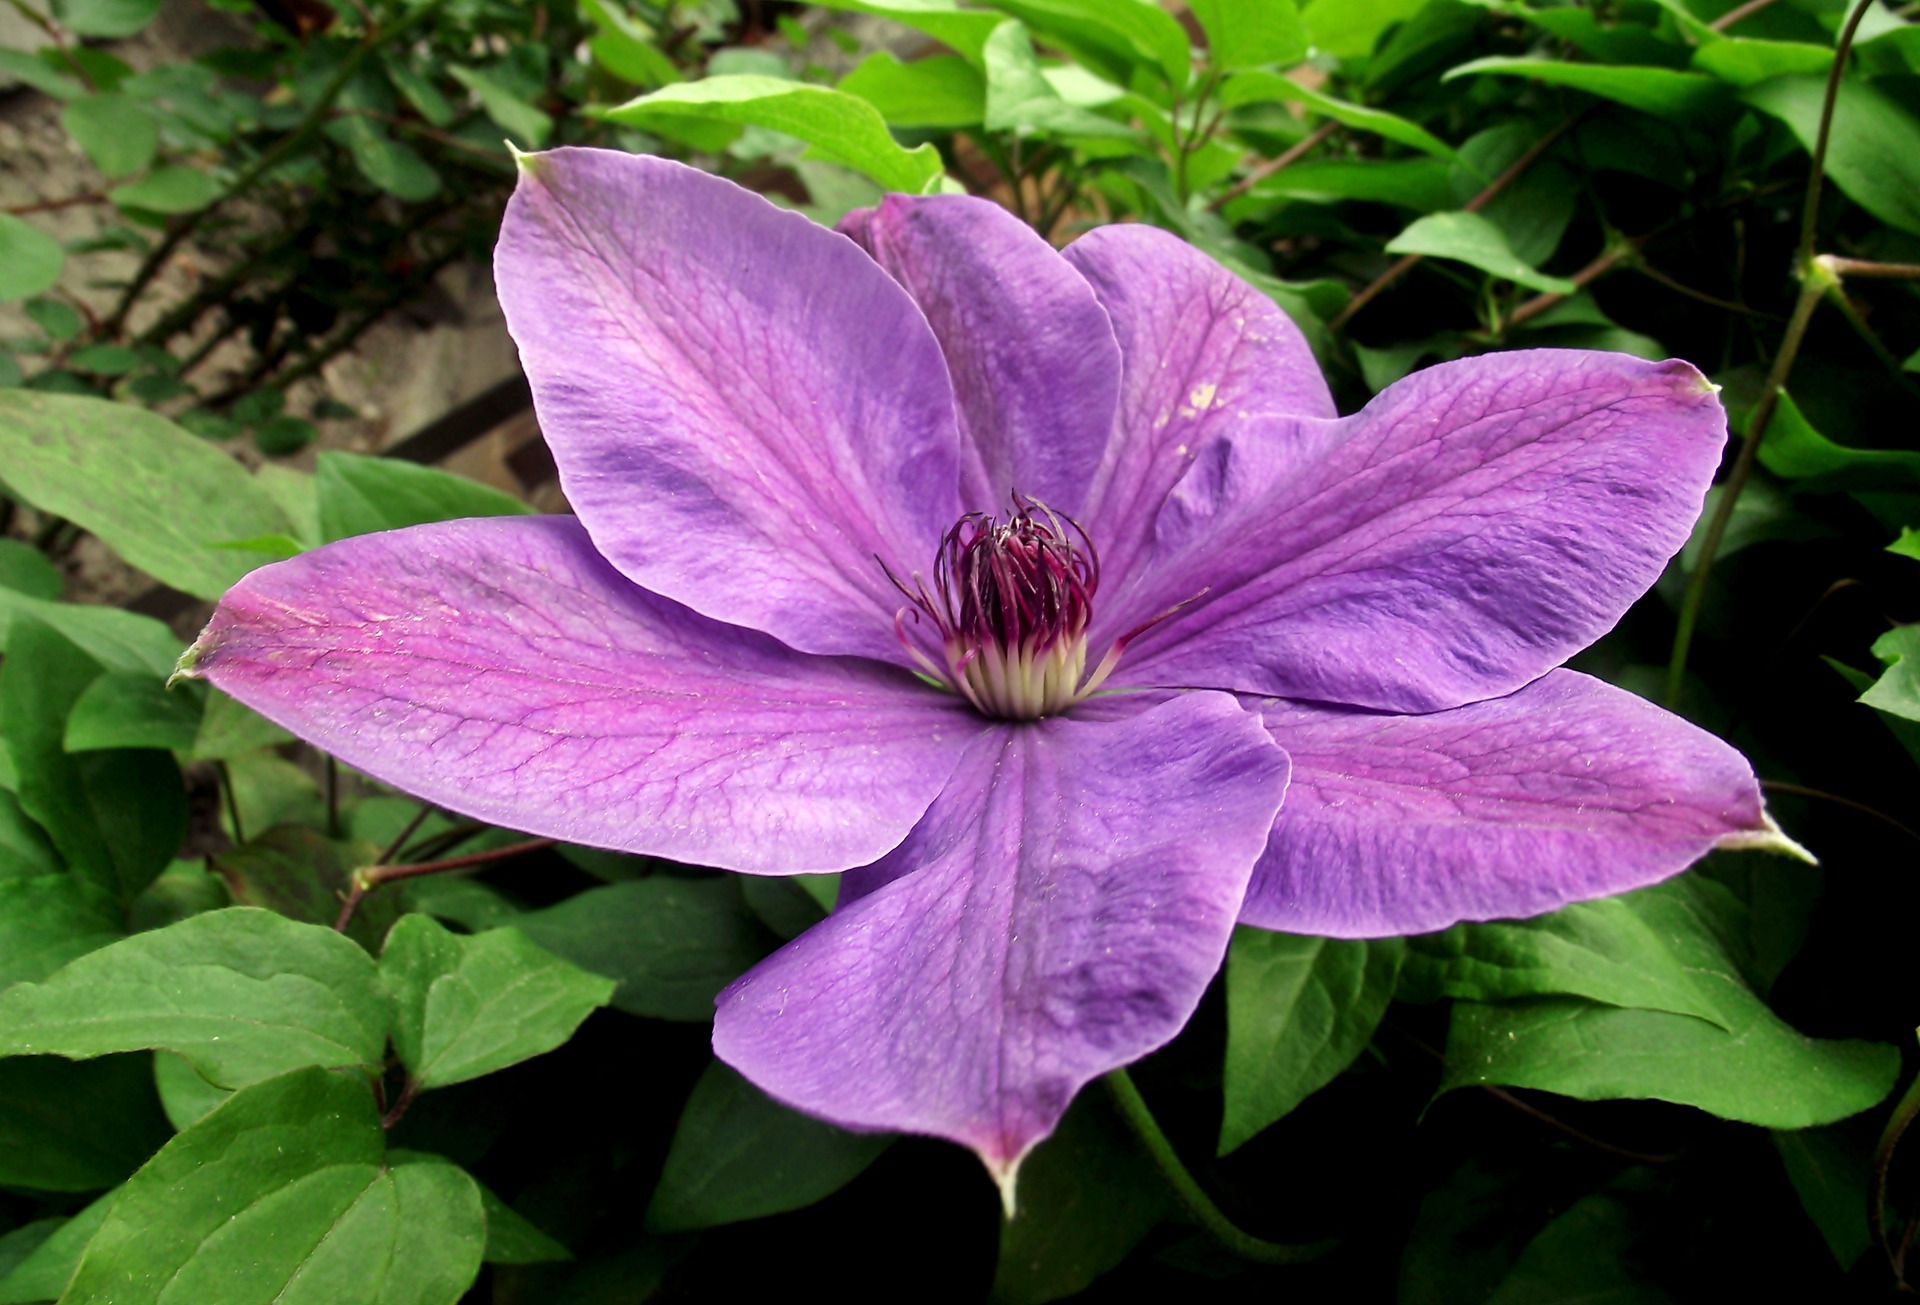 Clematis Care